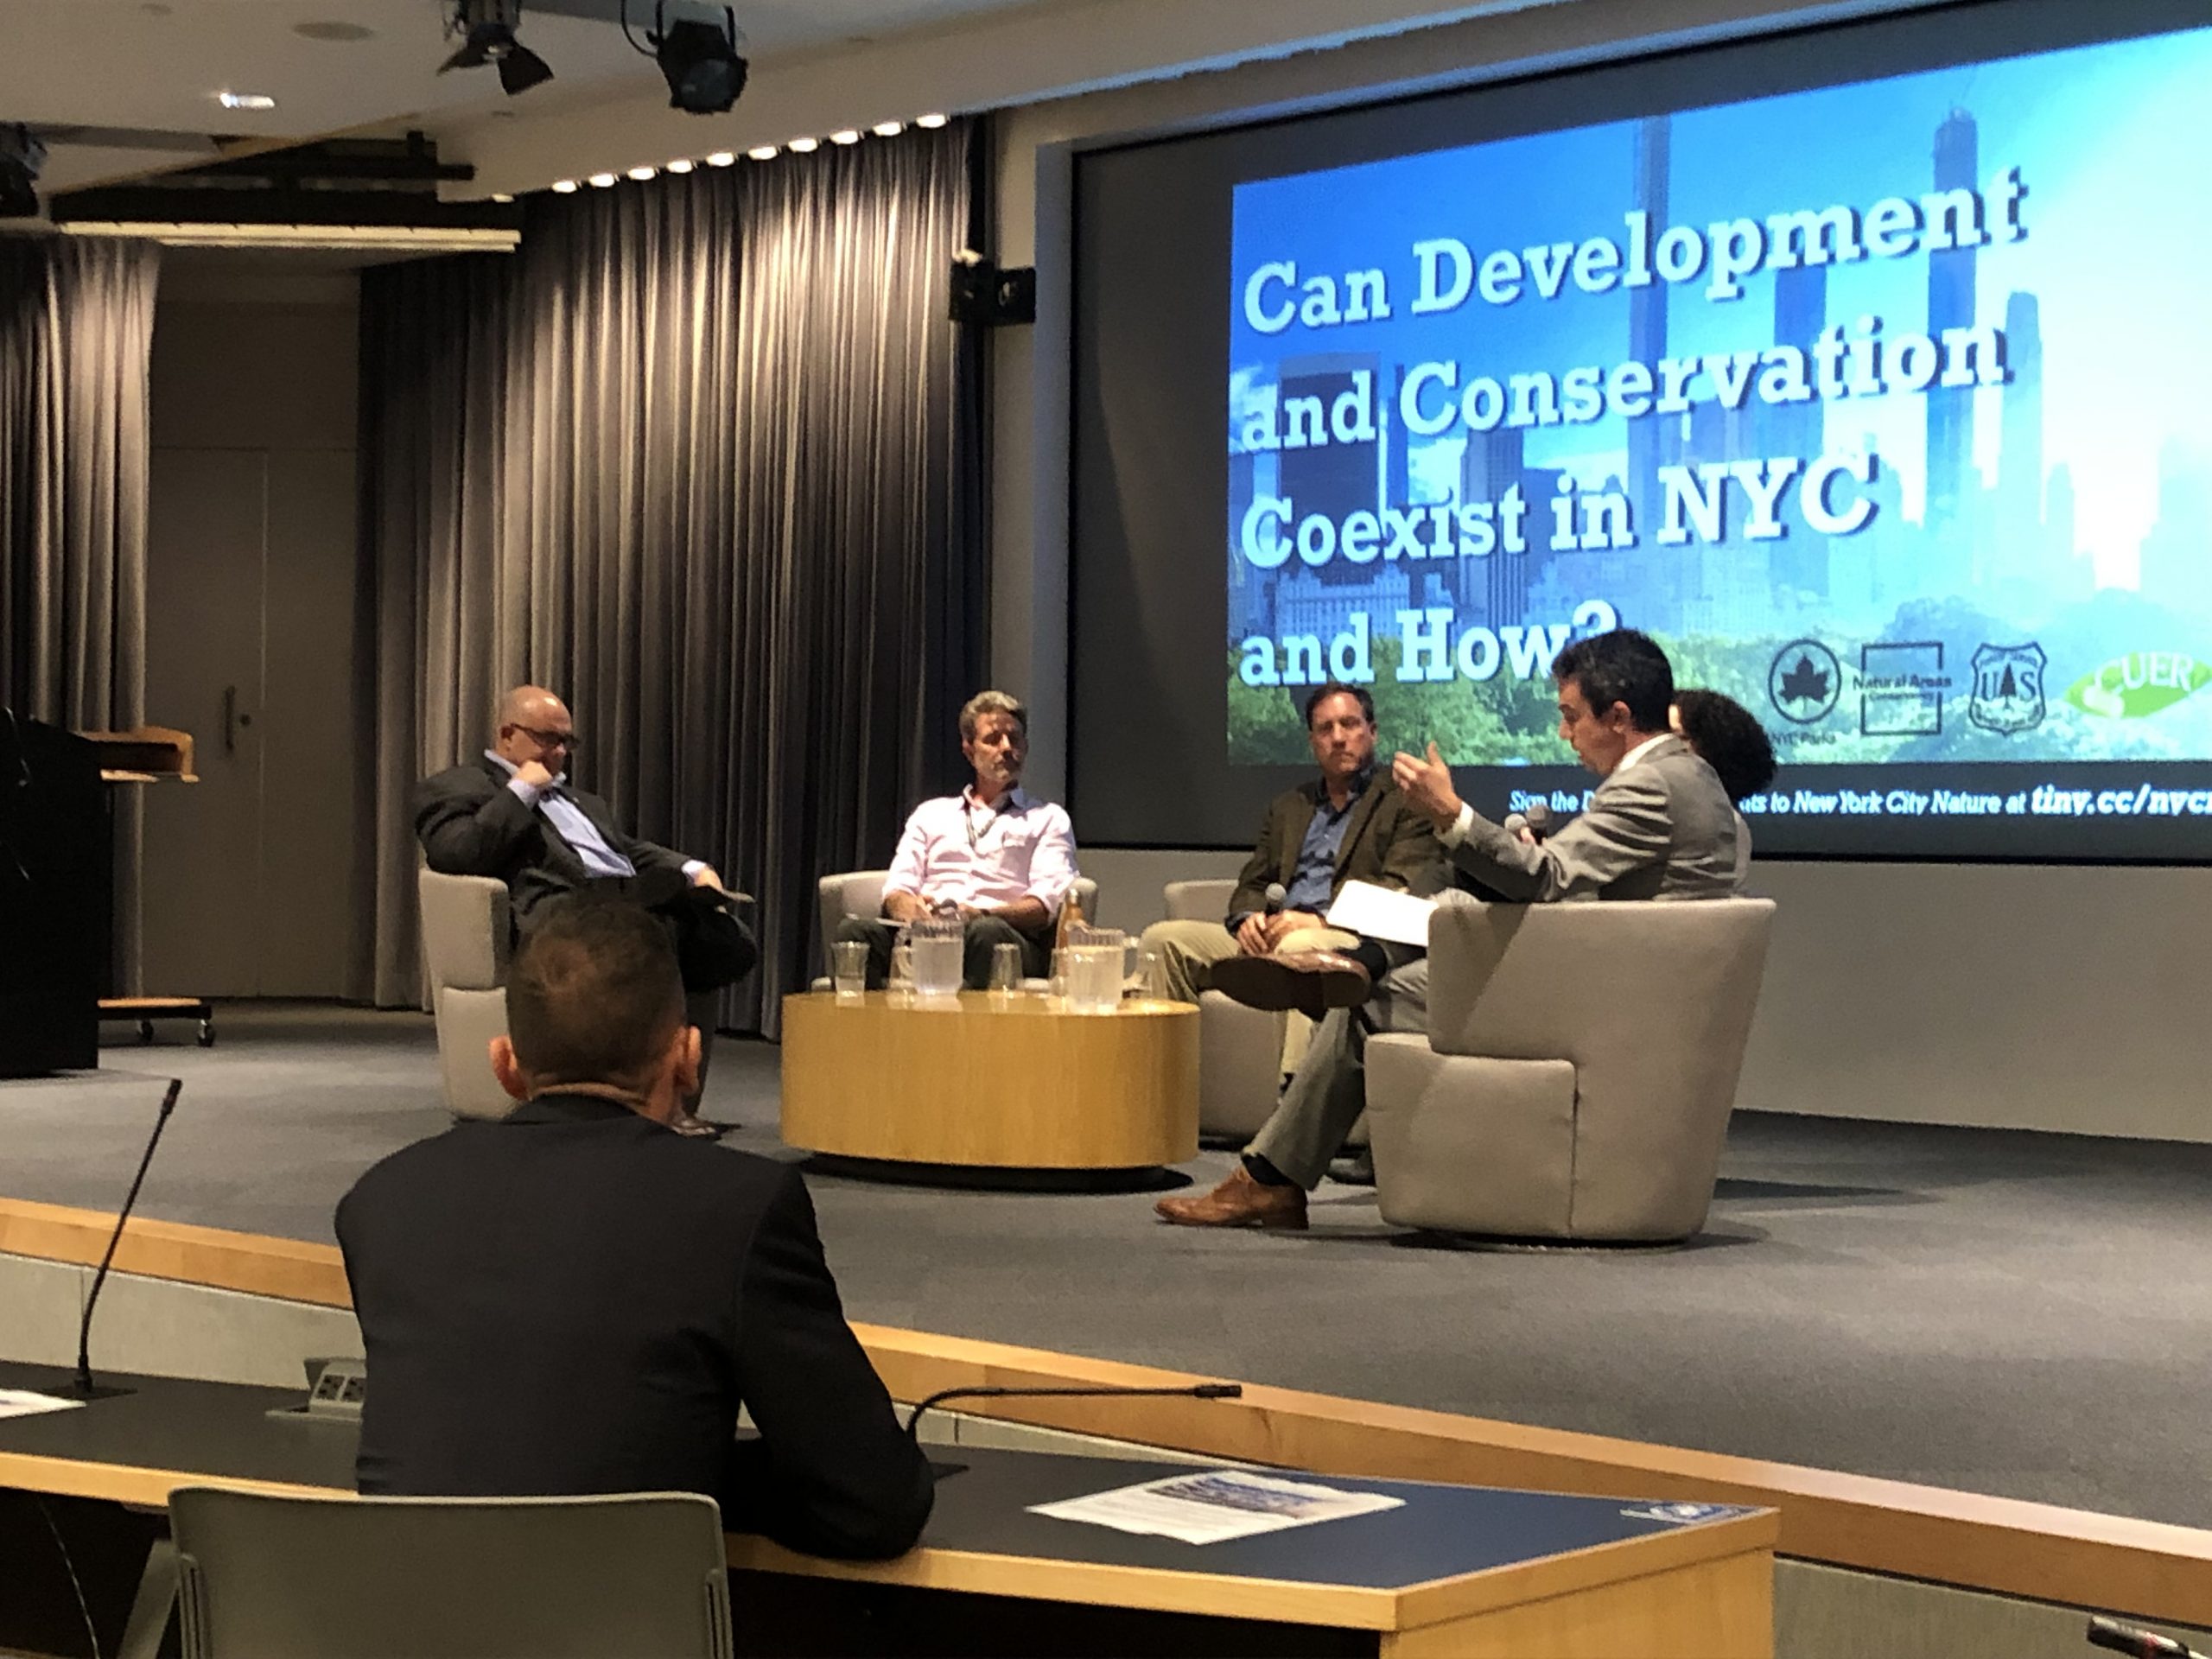 five panelists on stage at CUNY Law discuss environmental conservation and development in New York City